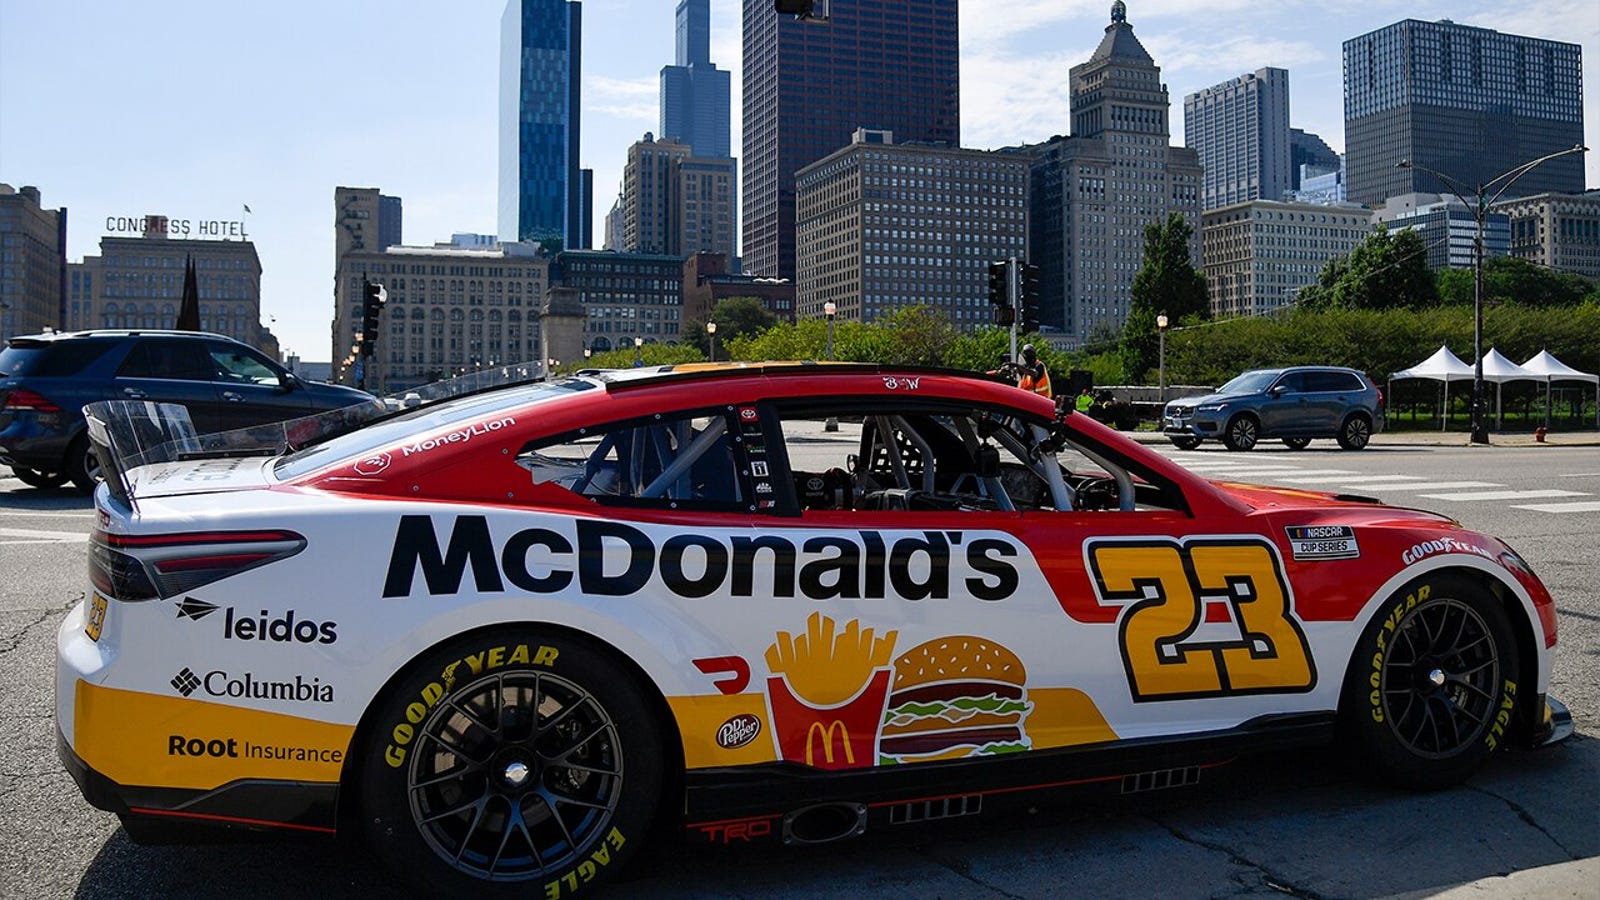 NASCAR announces first street race in Chicago in 2023